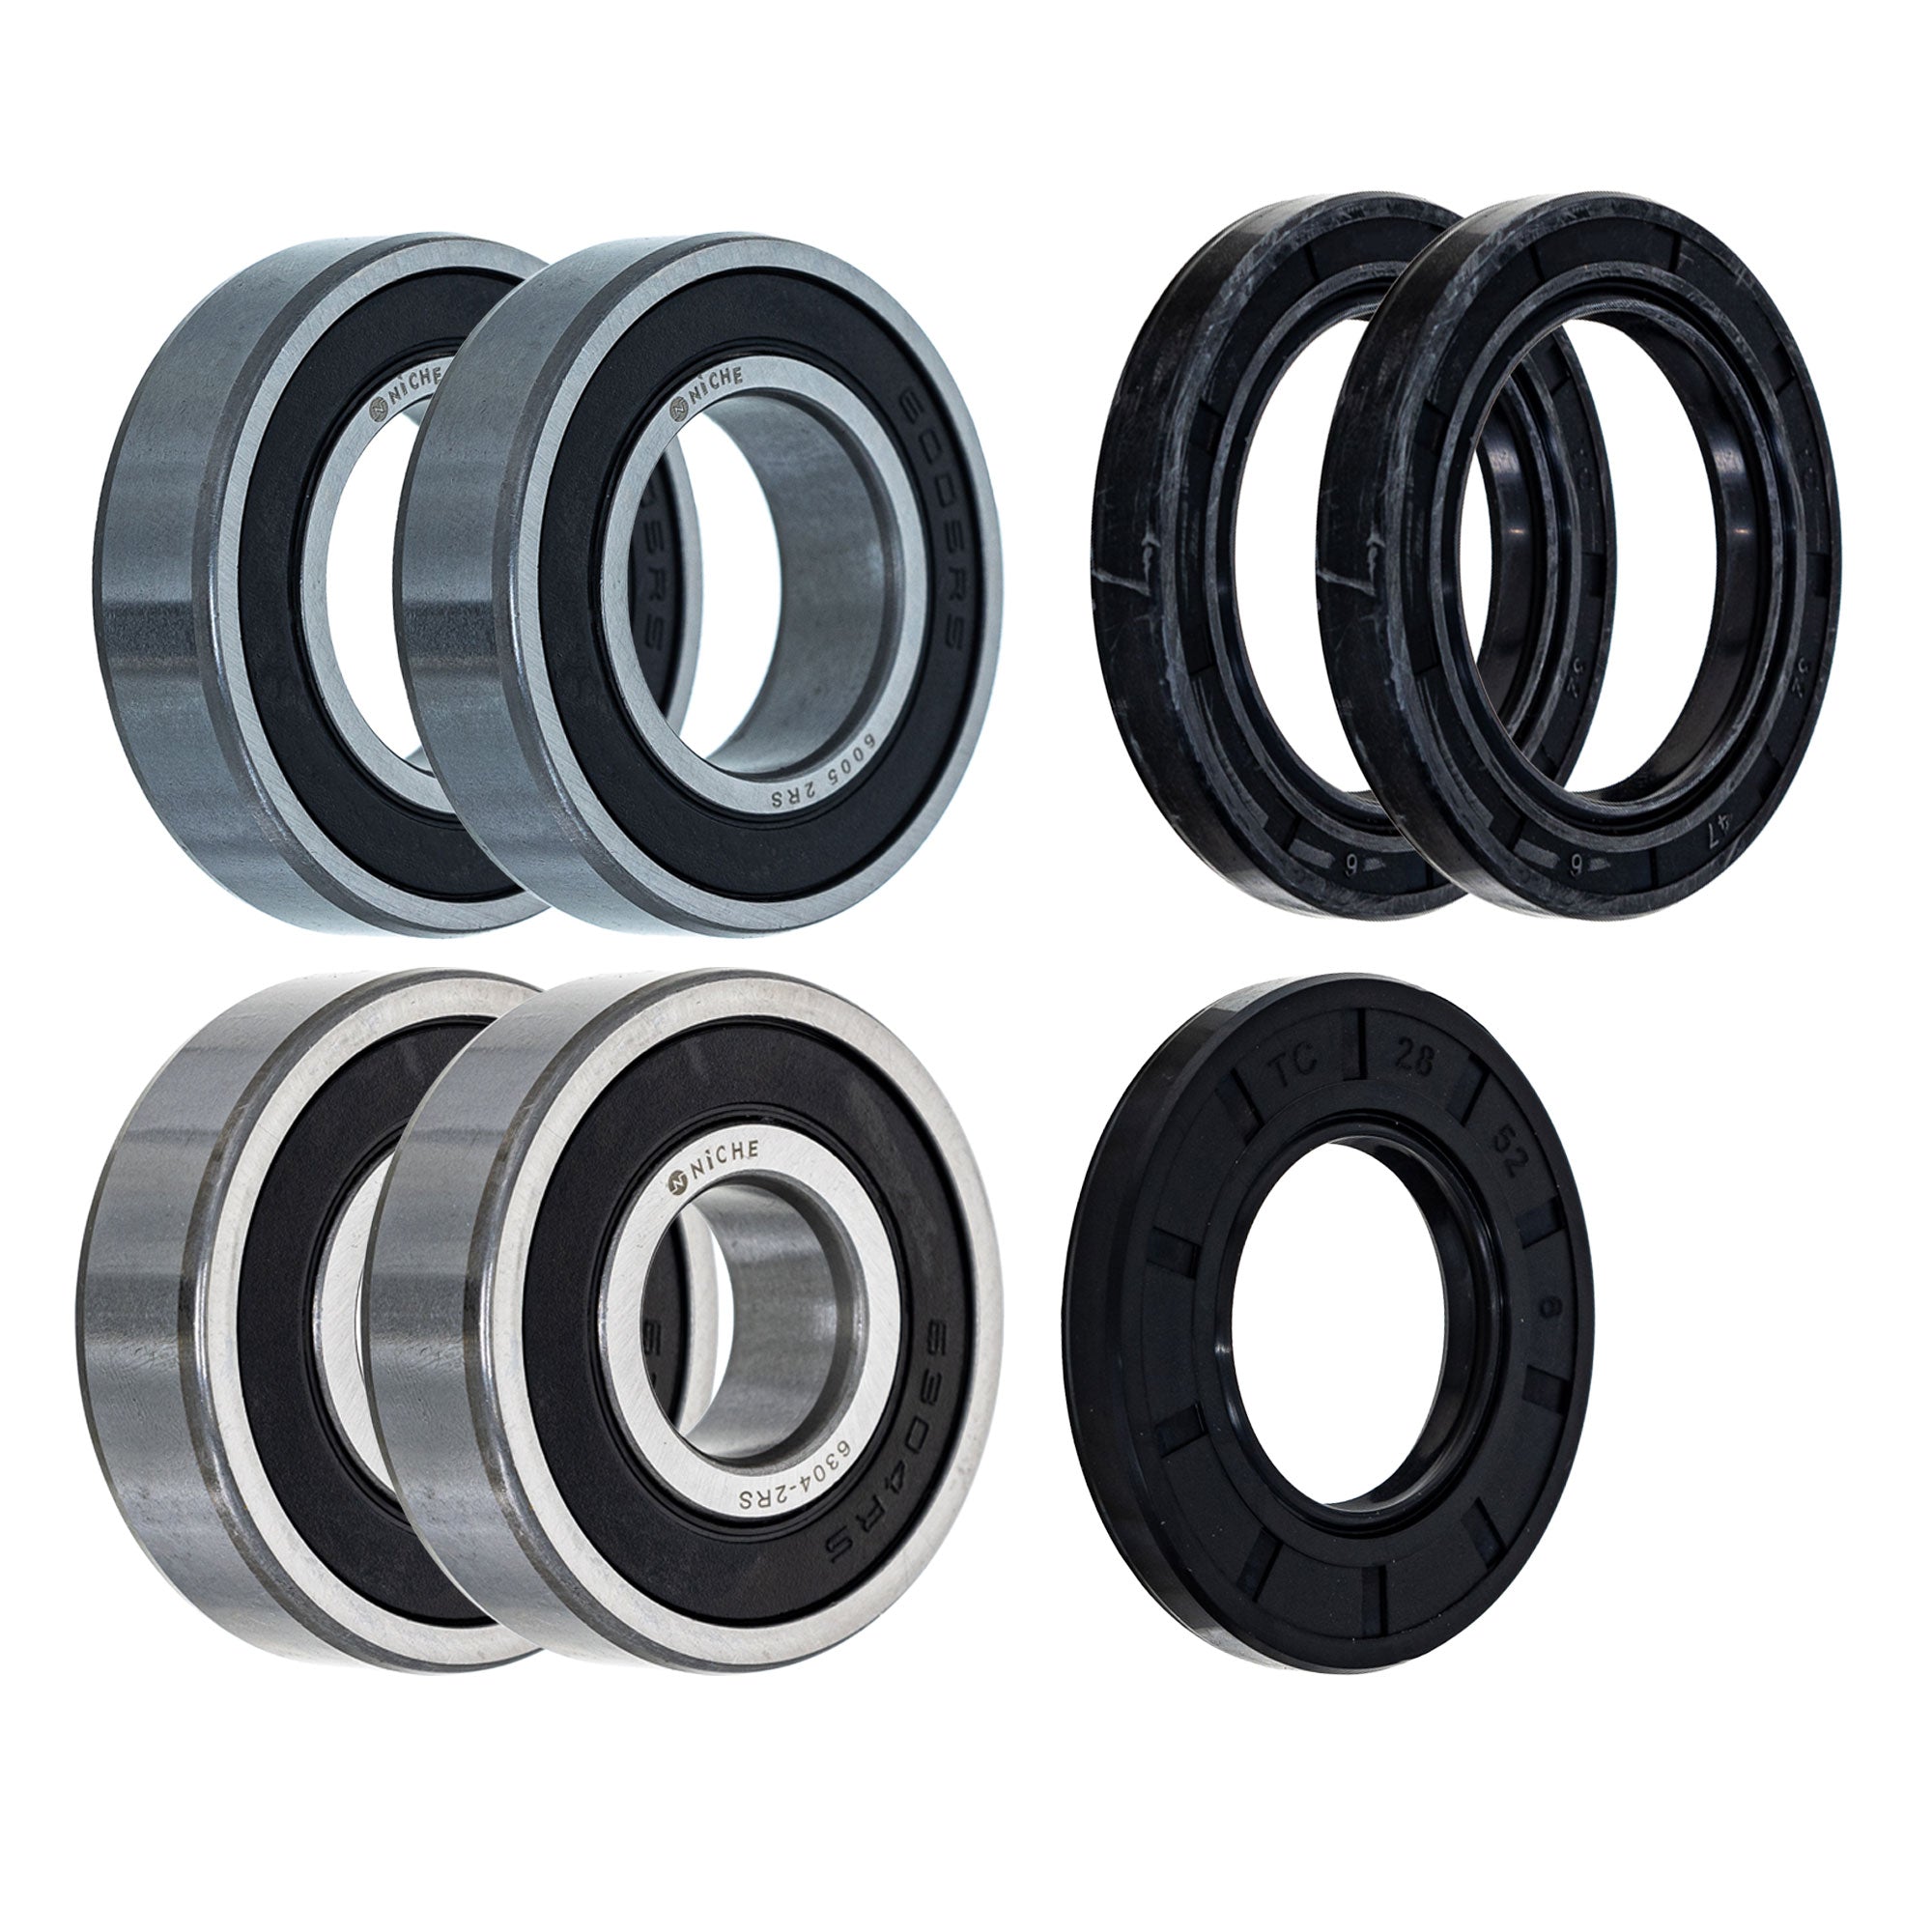 Wheel Bearing Seal Kit for zOTHER Vulcan Concours NICHE MK1008572